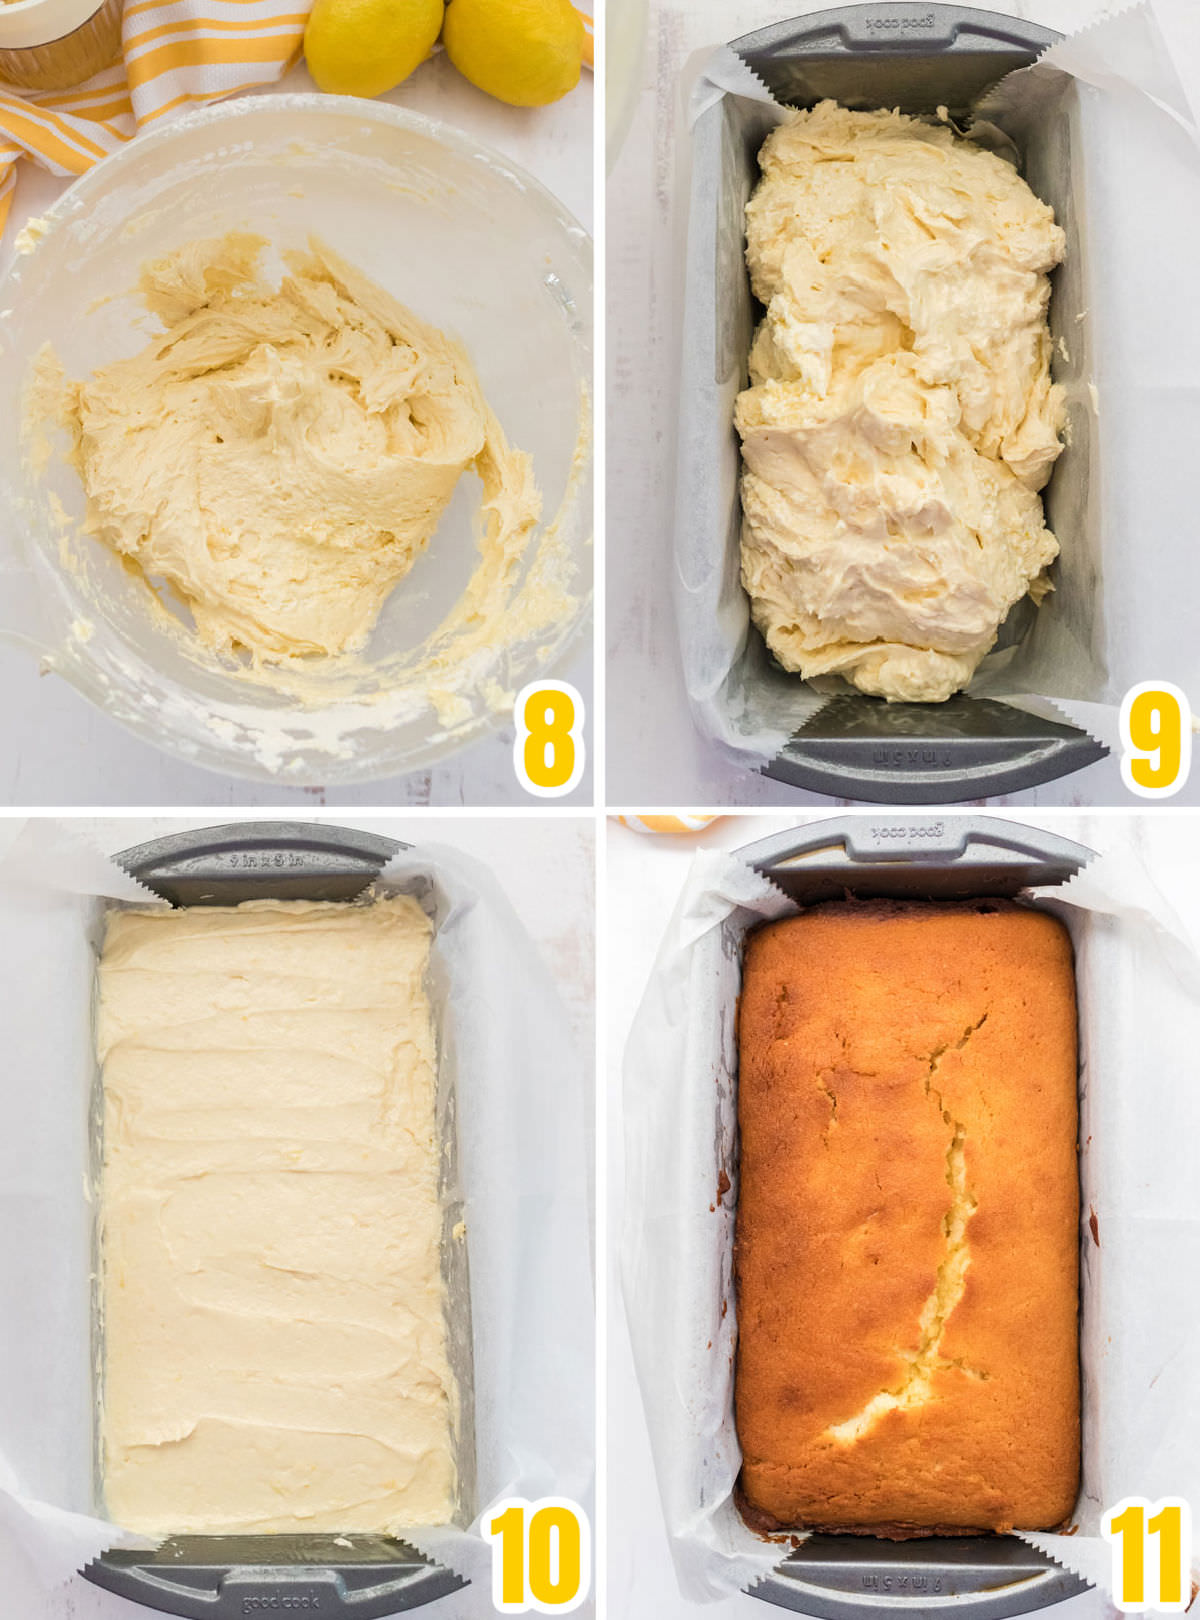 Collage image showing how to prepare the pound cake for baking.